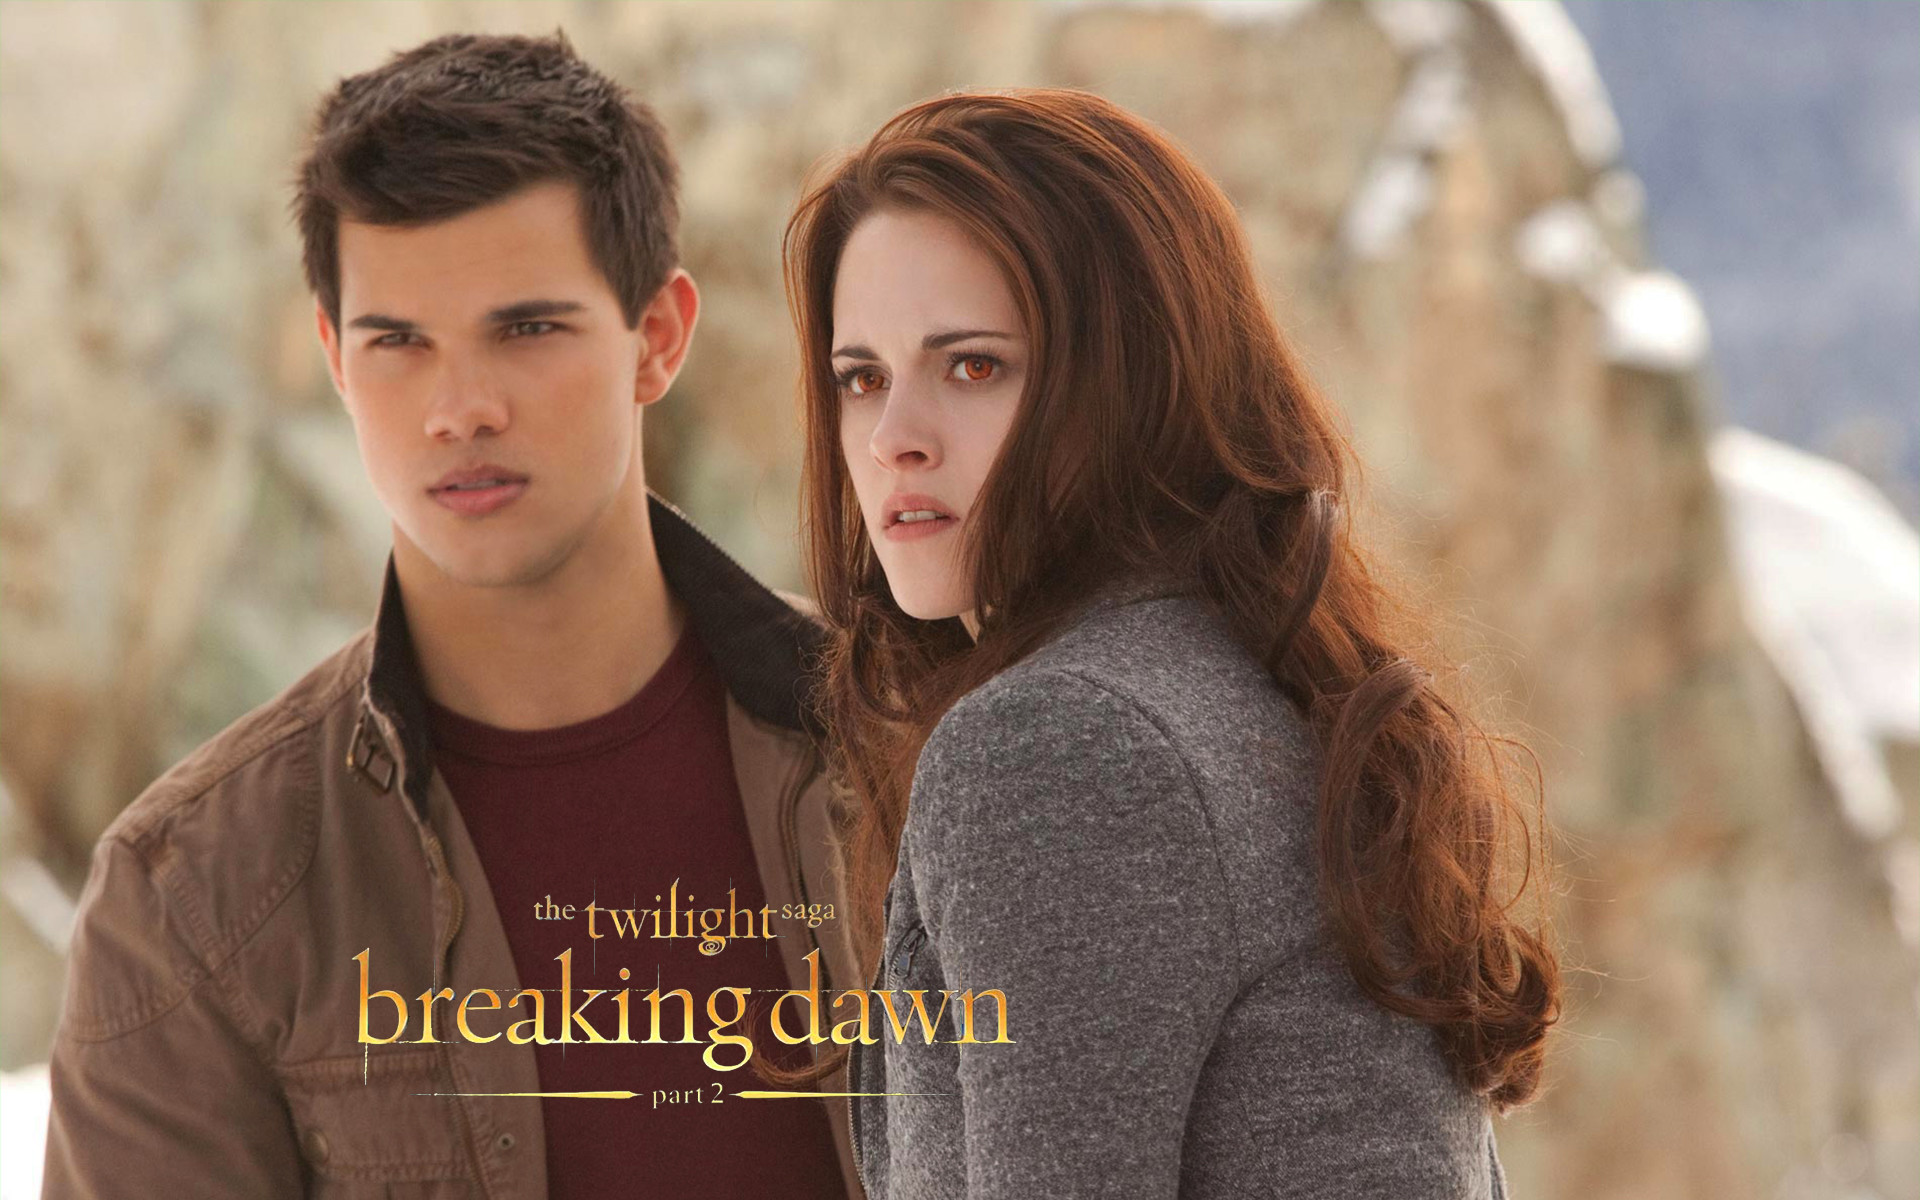 1920x1200 The Twilight Saga: Breaking Dawn Part II images BD part 2 wallpaper HD  wallpaper and background photos